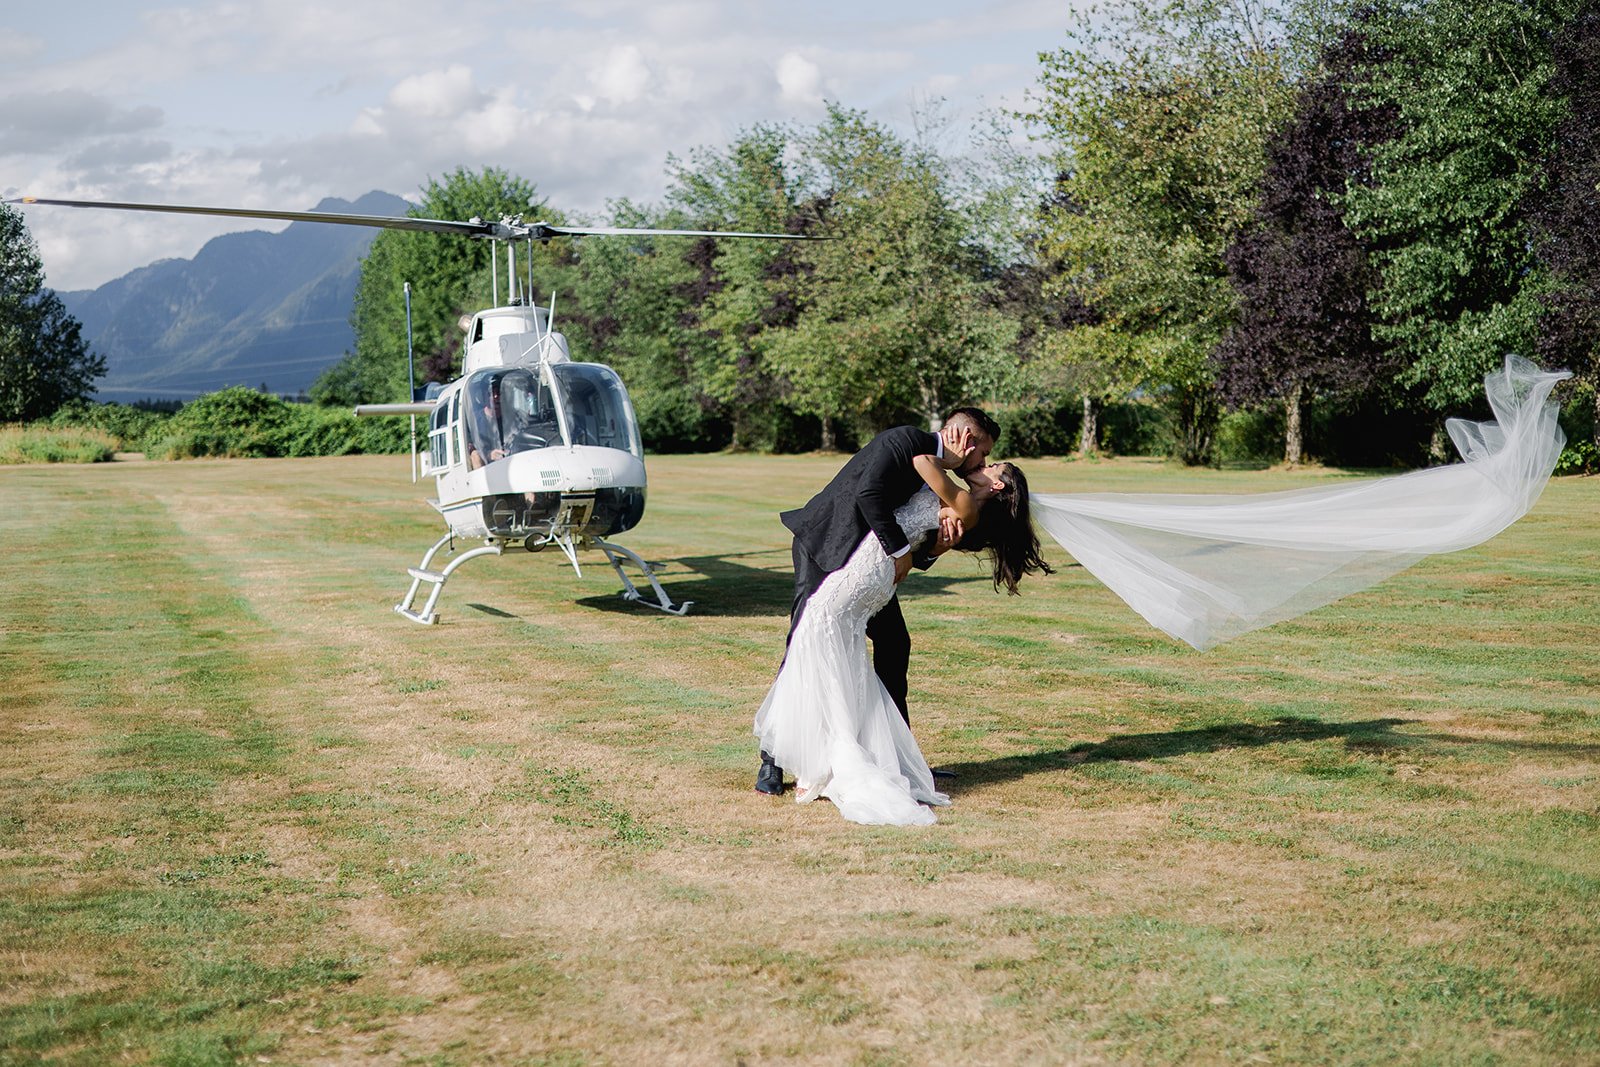 Despite FAA regulations, newly married Vancouver couple passionately kisses dangerously to helicopter 